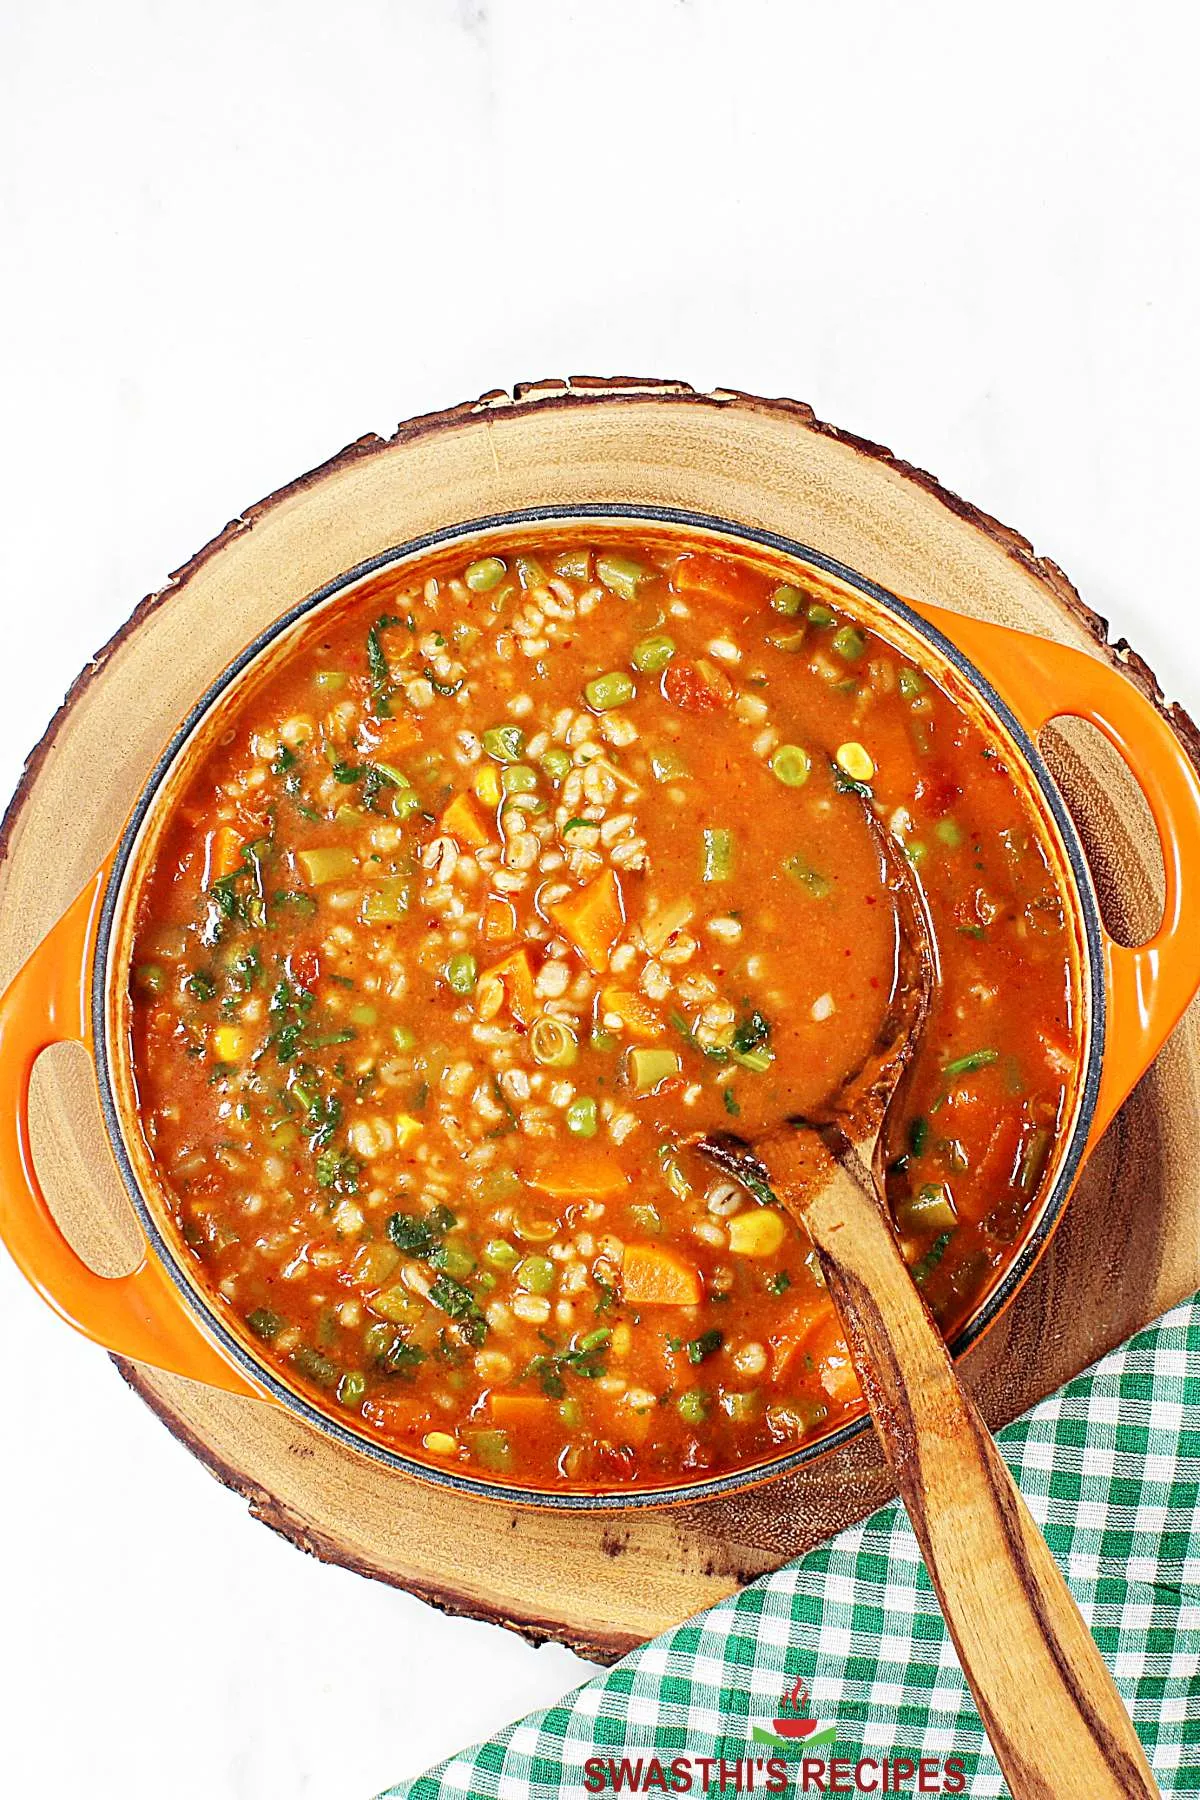 vegetable barley soup made with pearl barley, vegetables and curry powder